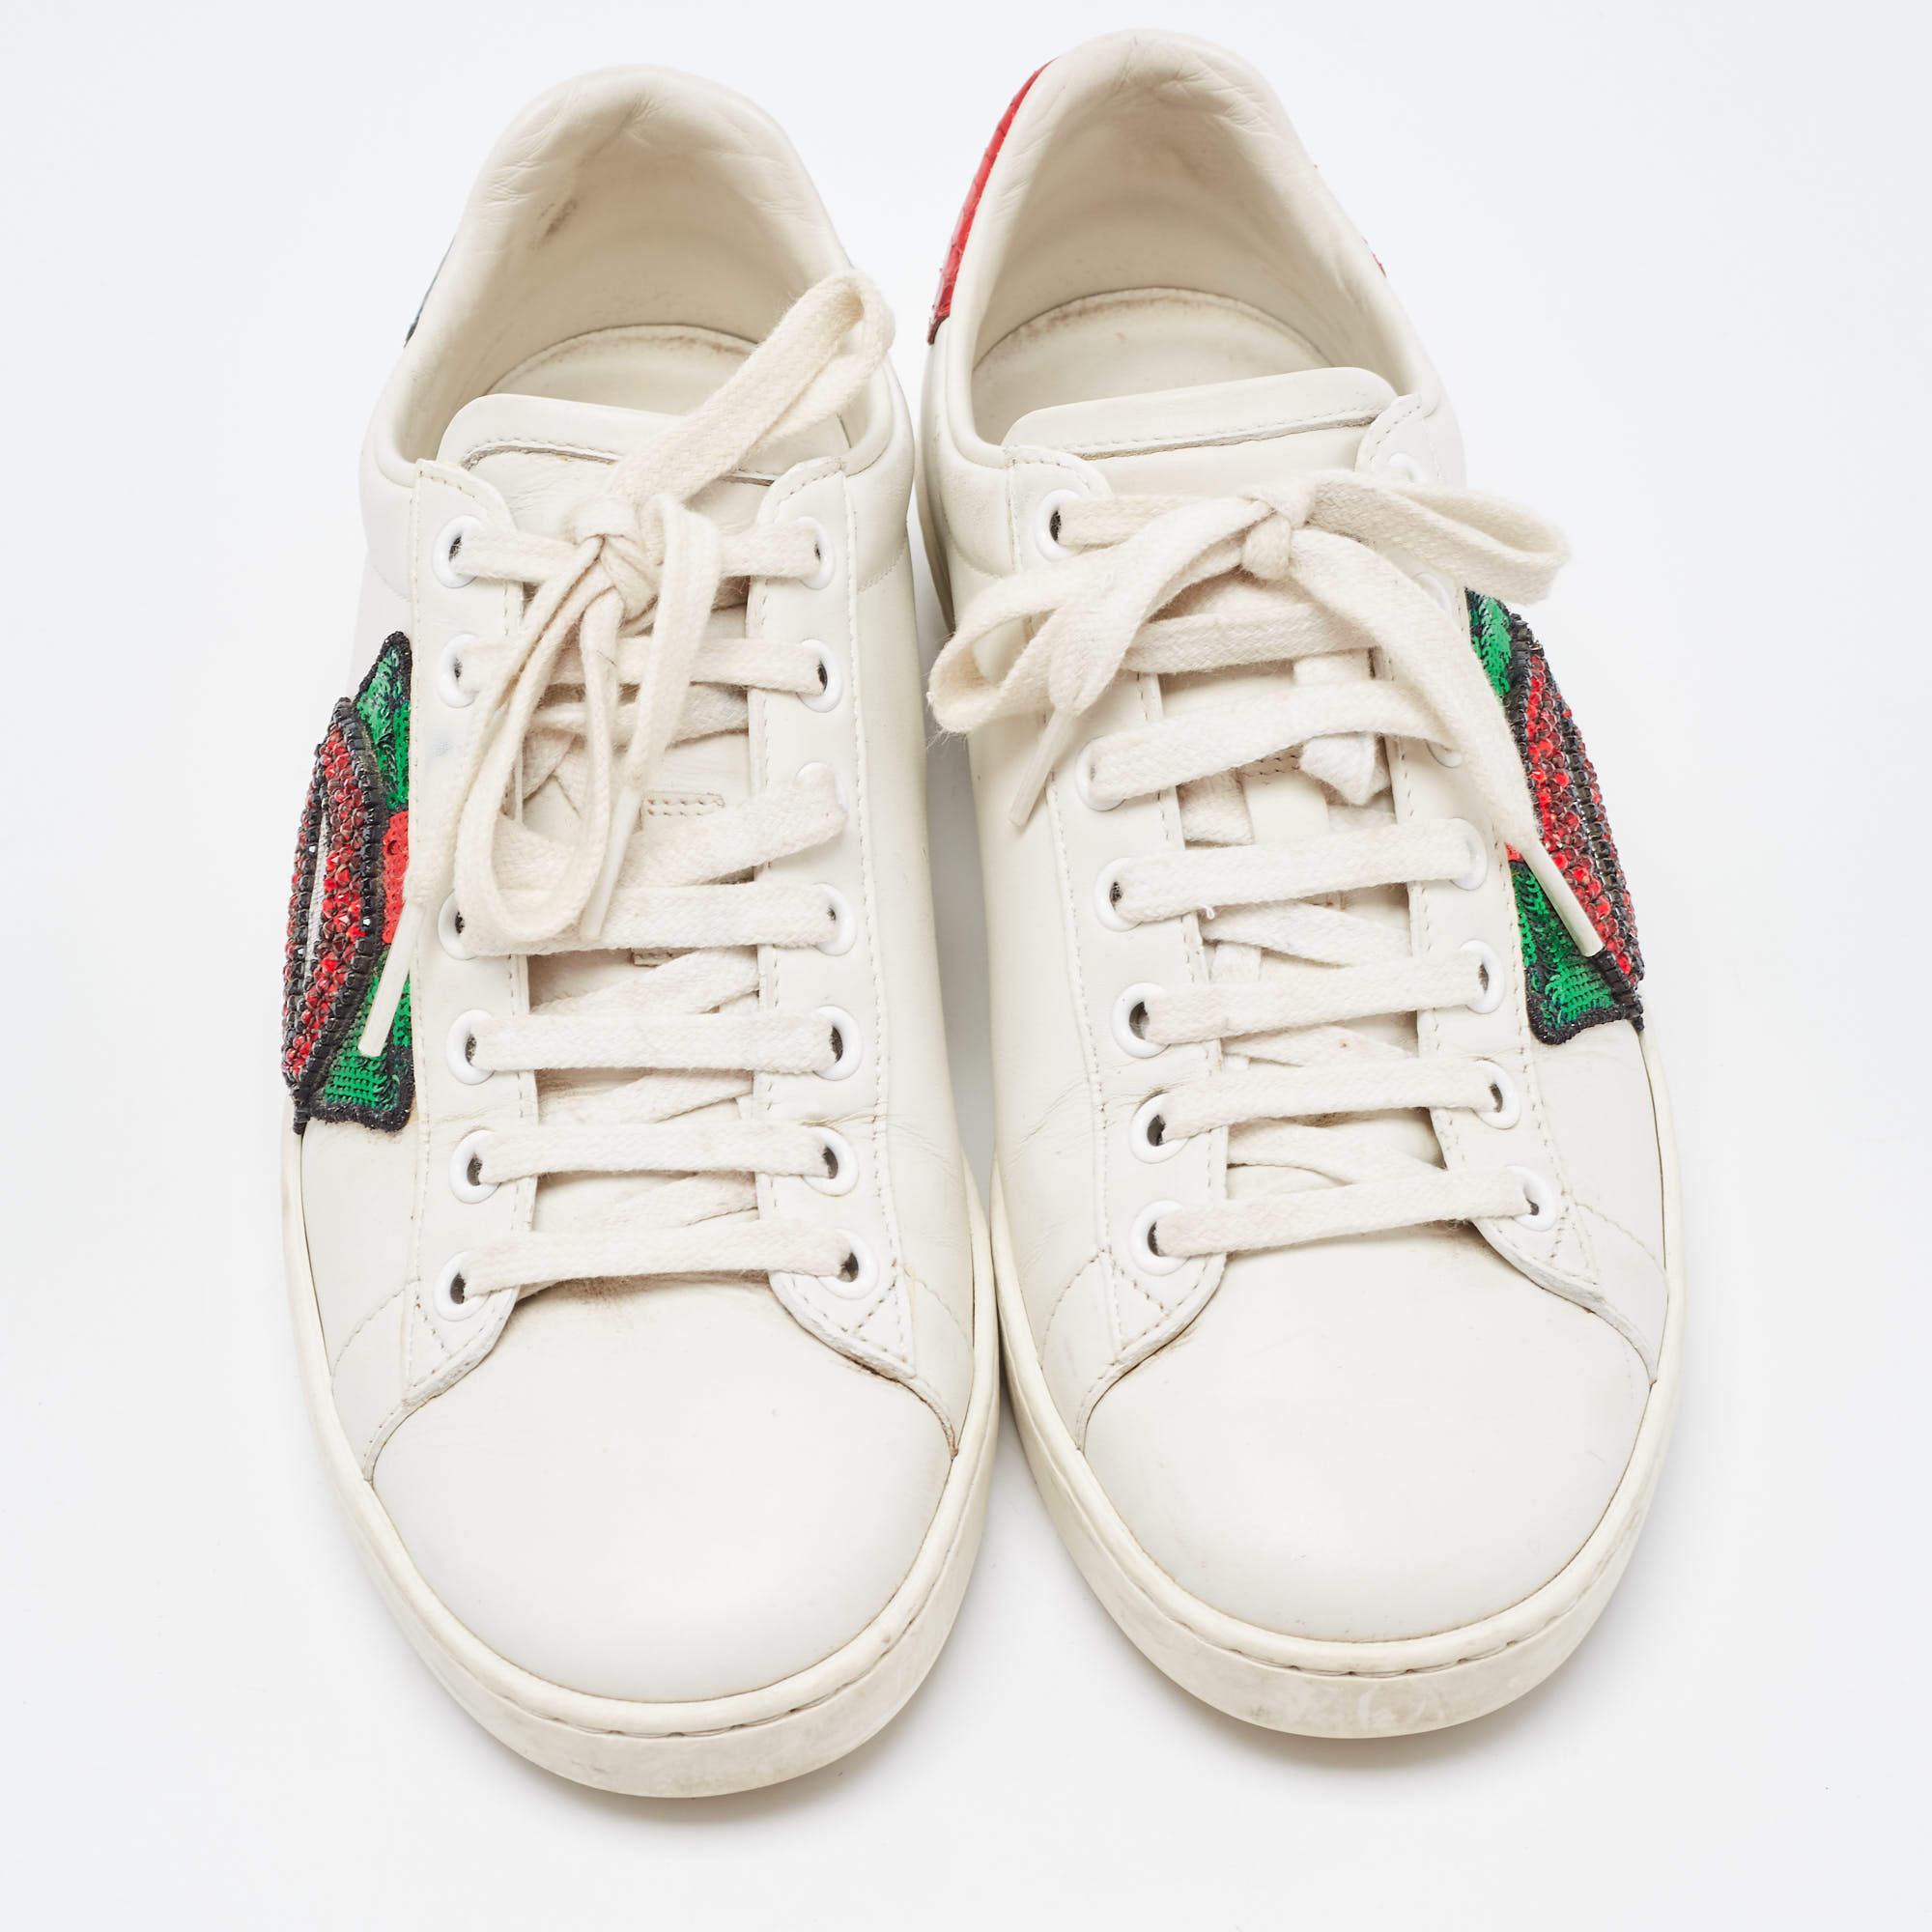 Gucci White Leather Embellished Lip Ace Sneakers Size 36 For Sale 3